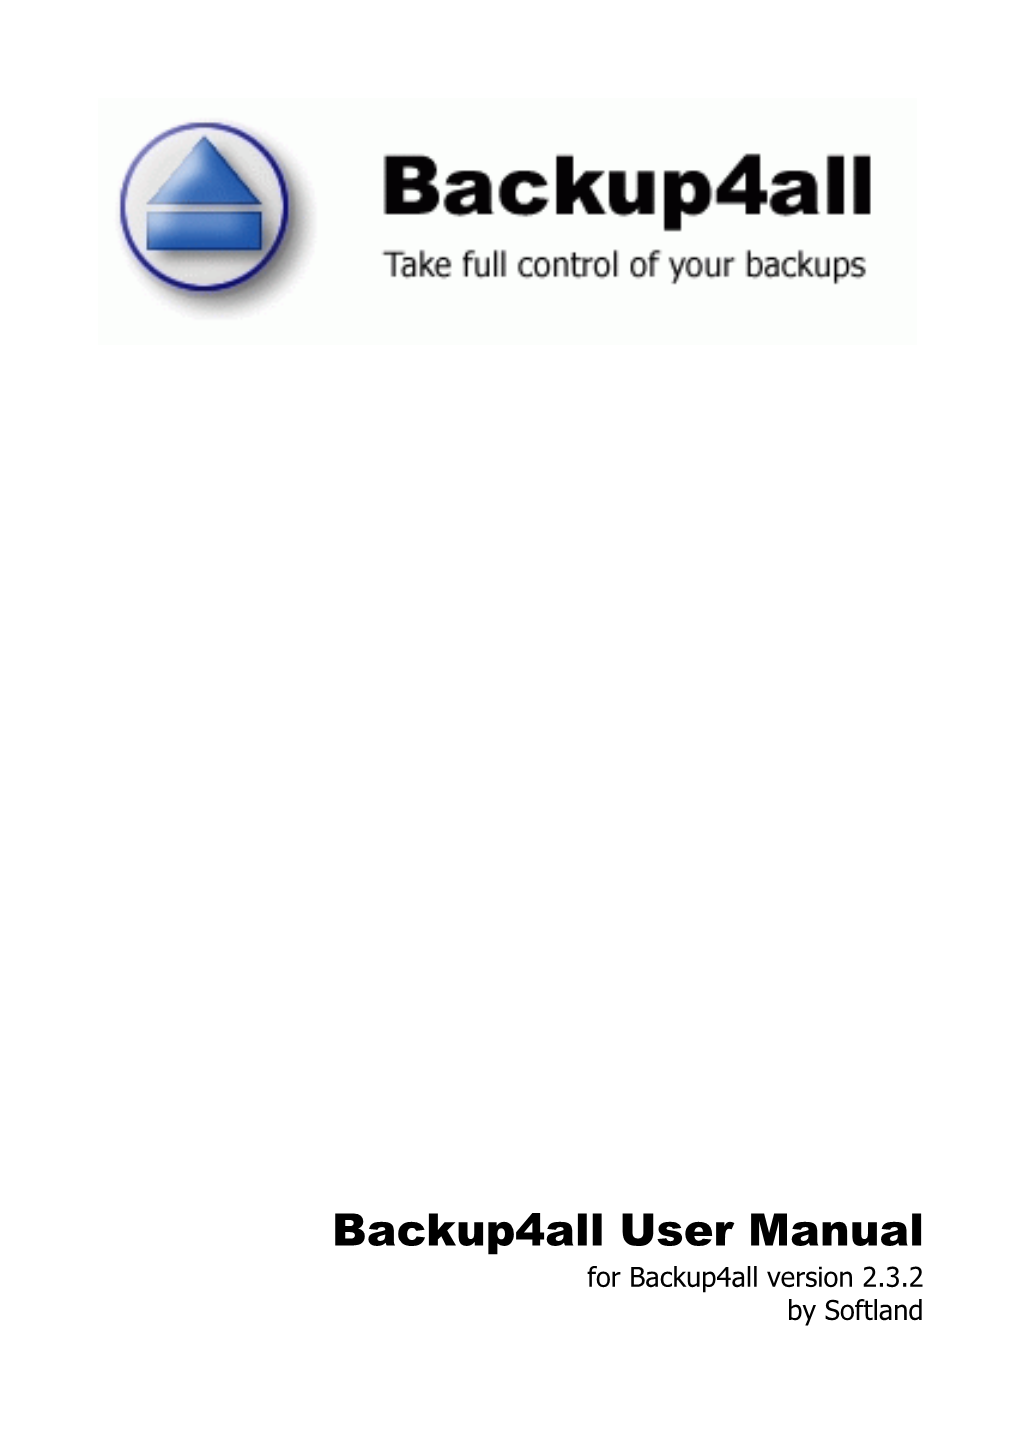 Backup4all User Manual for Backup4all Version 2.3.2 by Softland